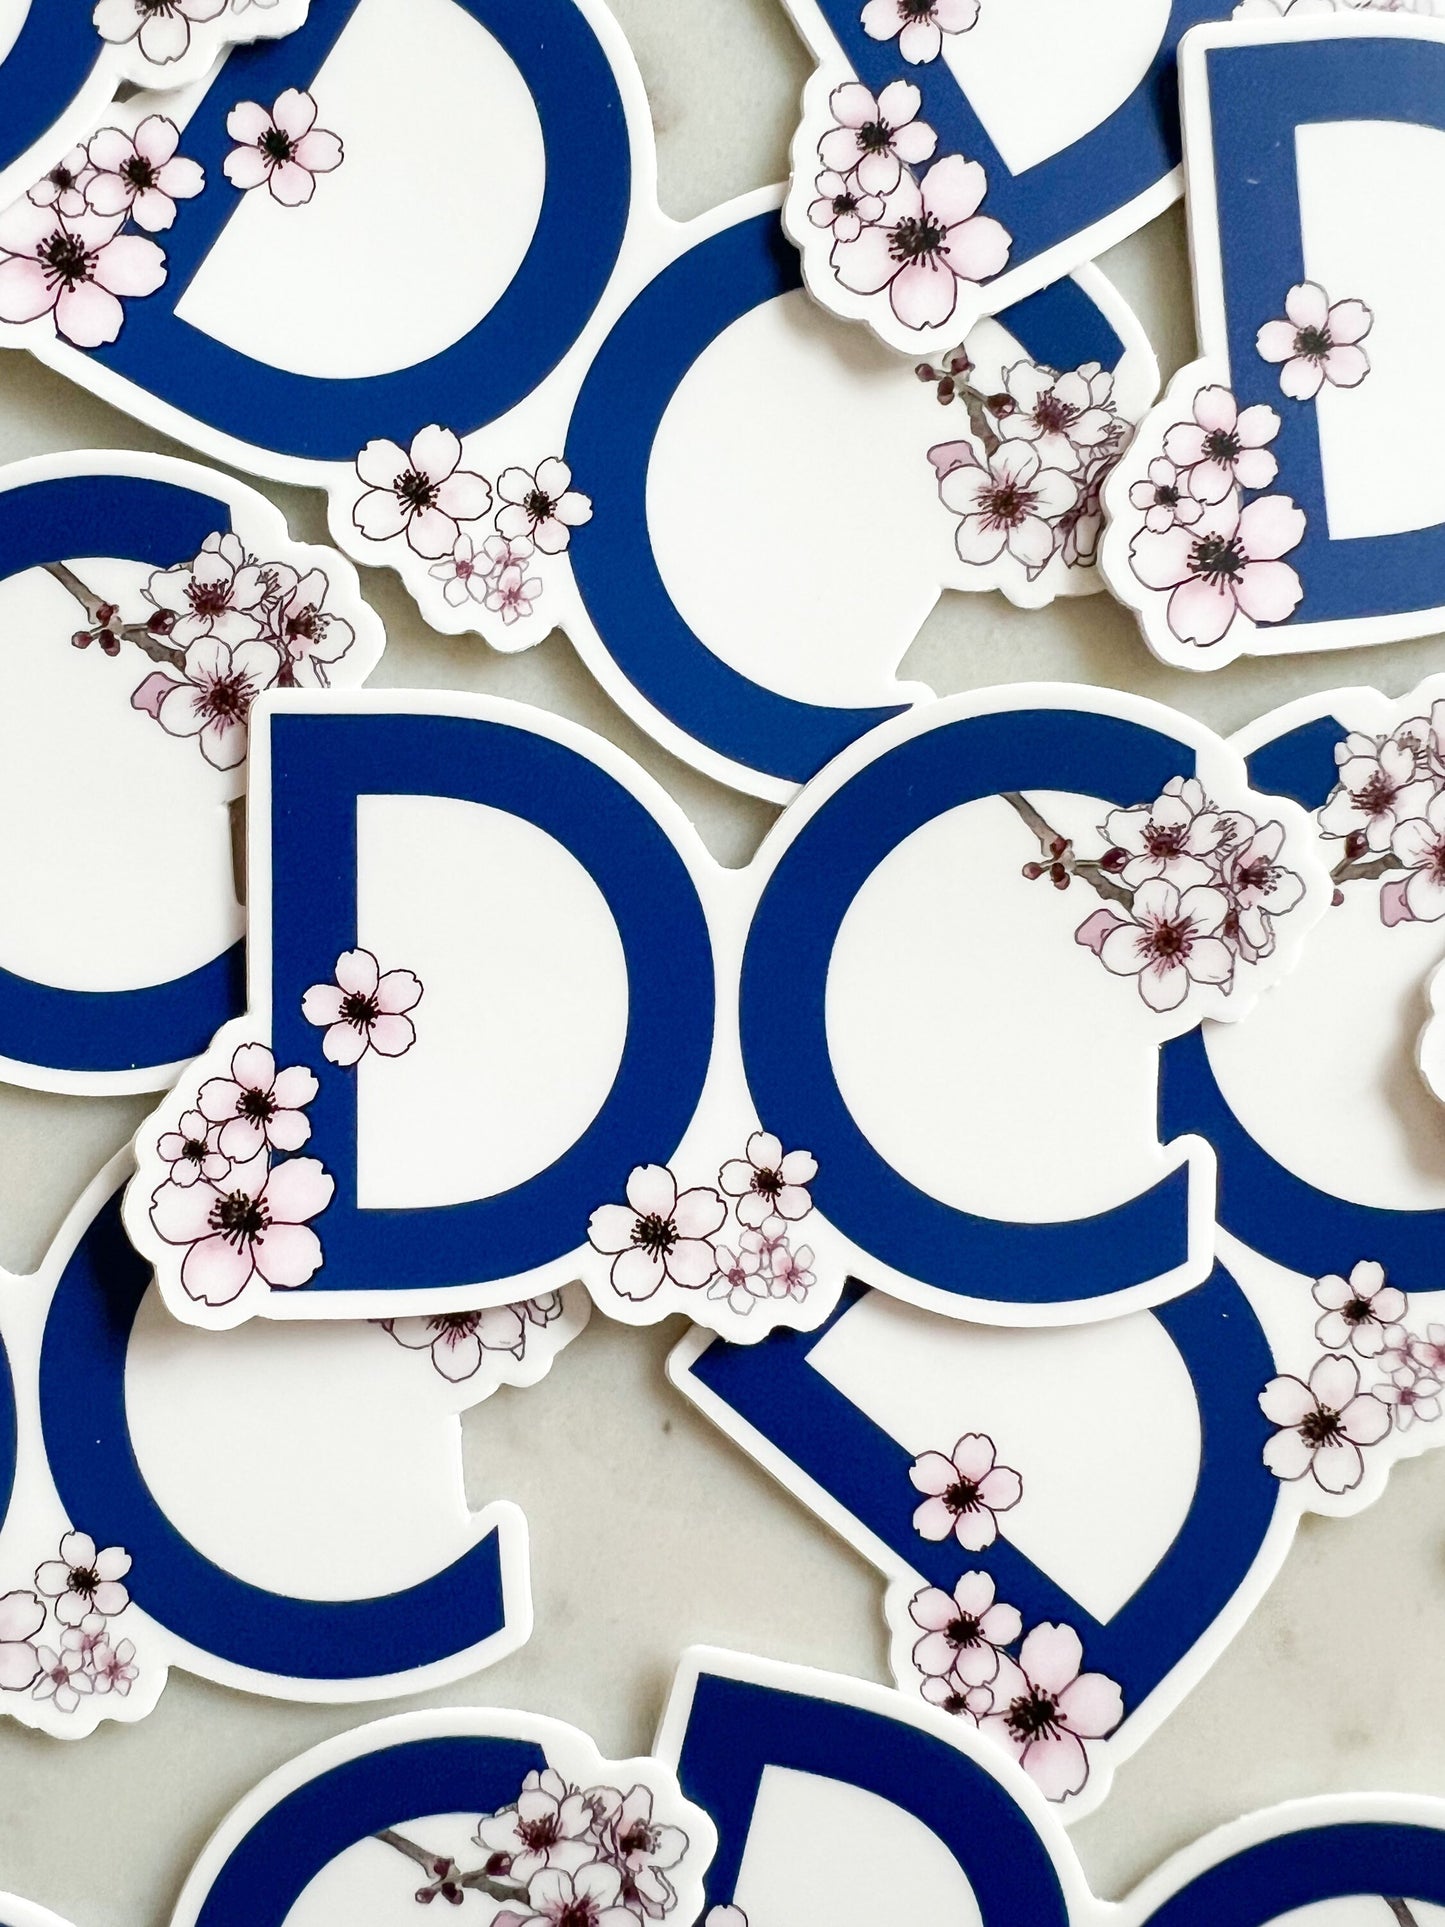 DC - District of Columbia state flower sticker - Cherry Blossom